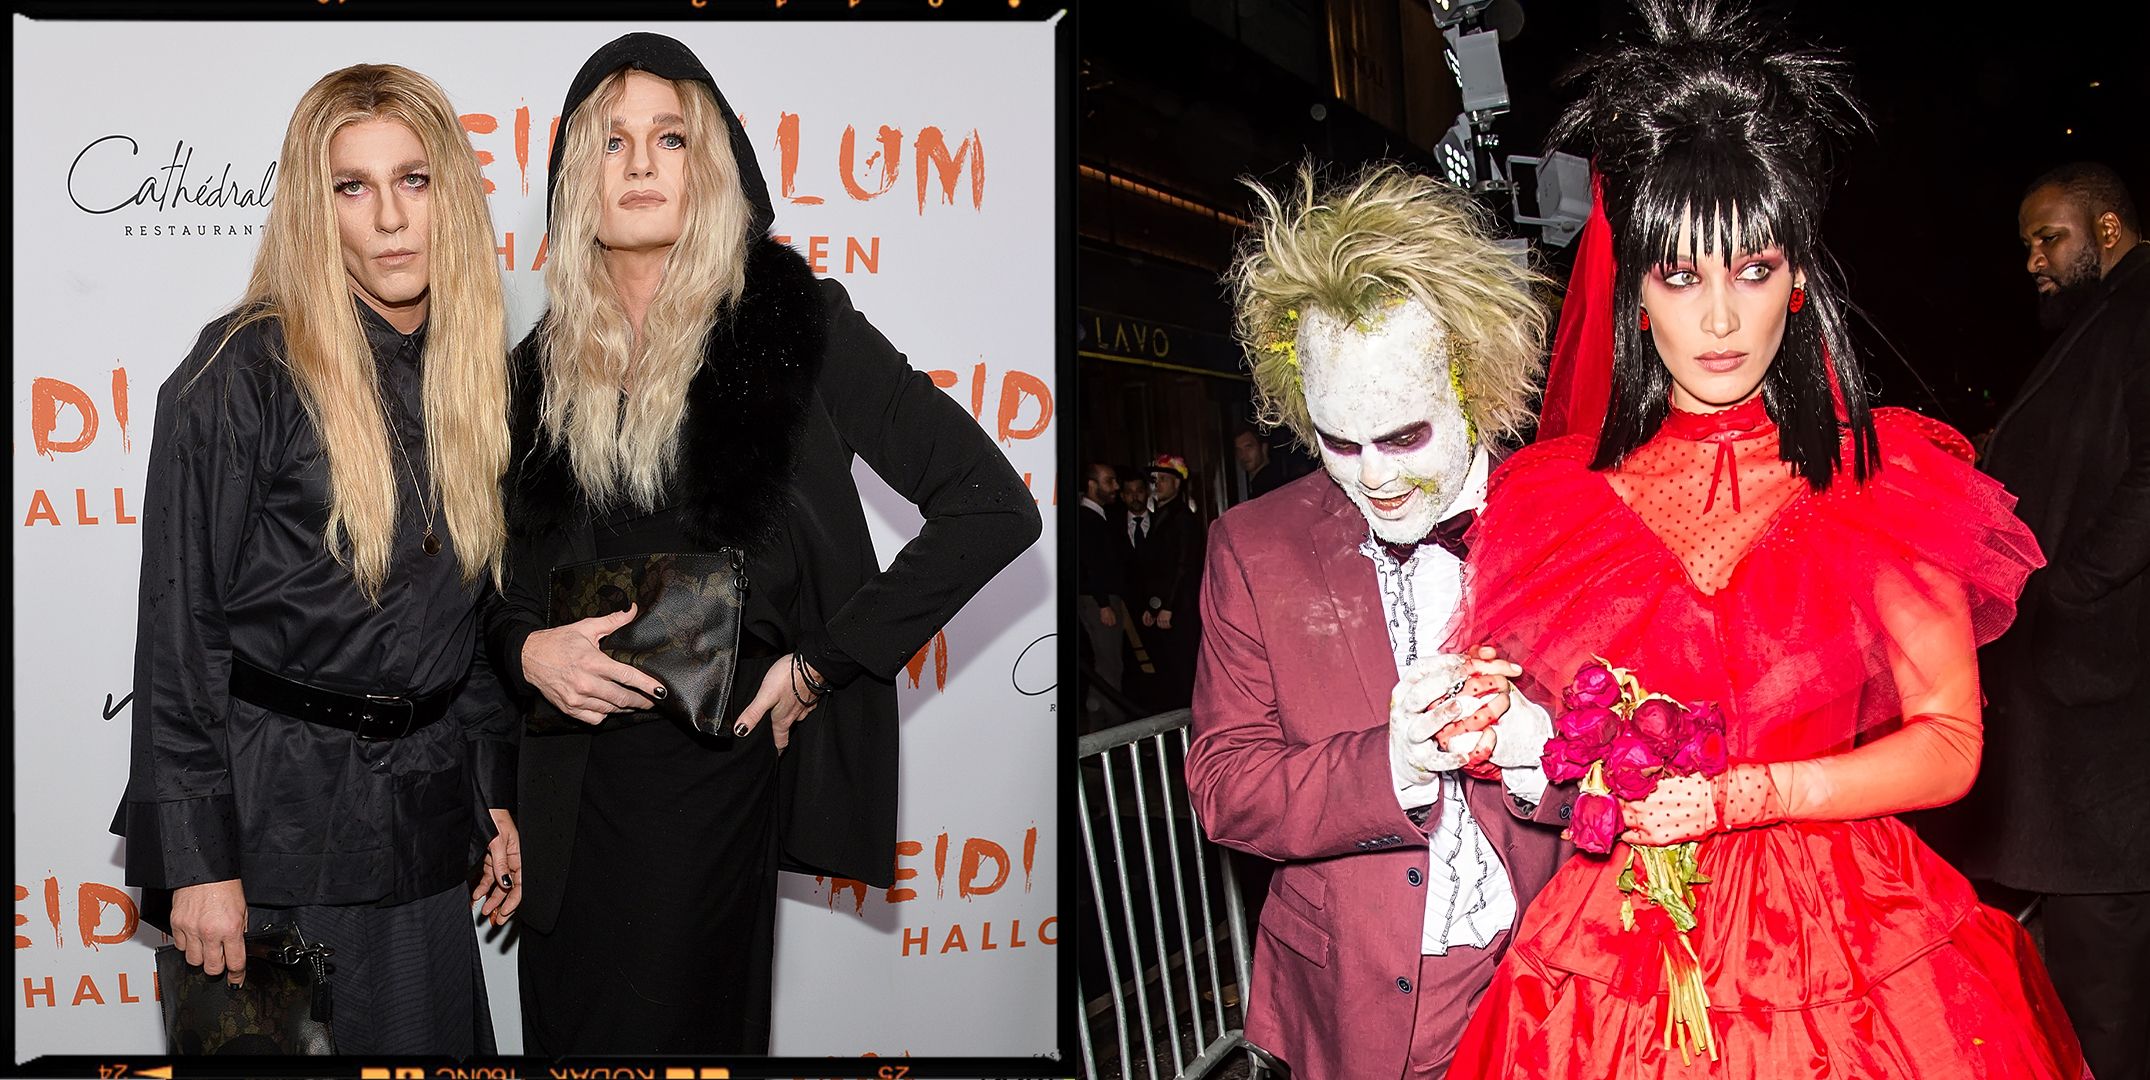 Who is the best-looking, or has the best costume/attire, among the